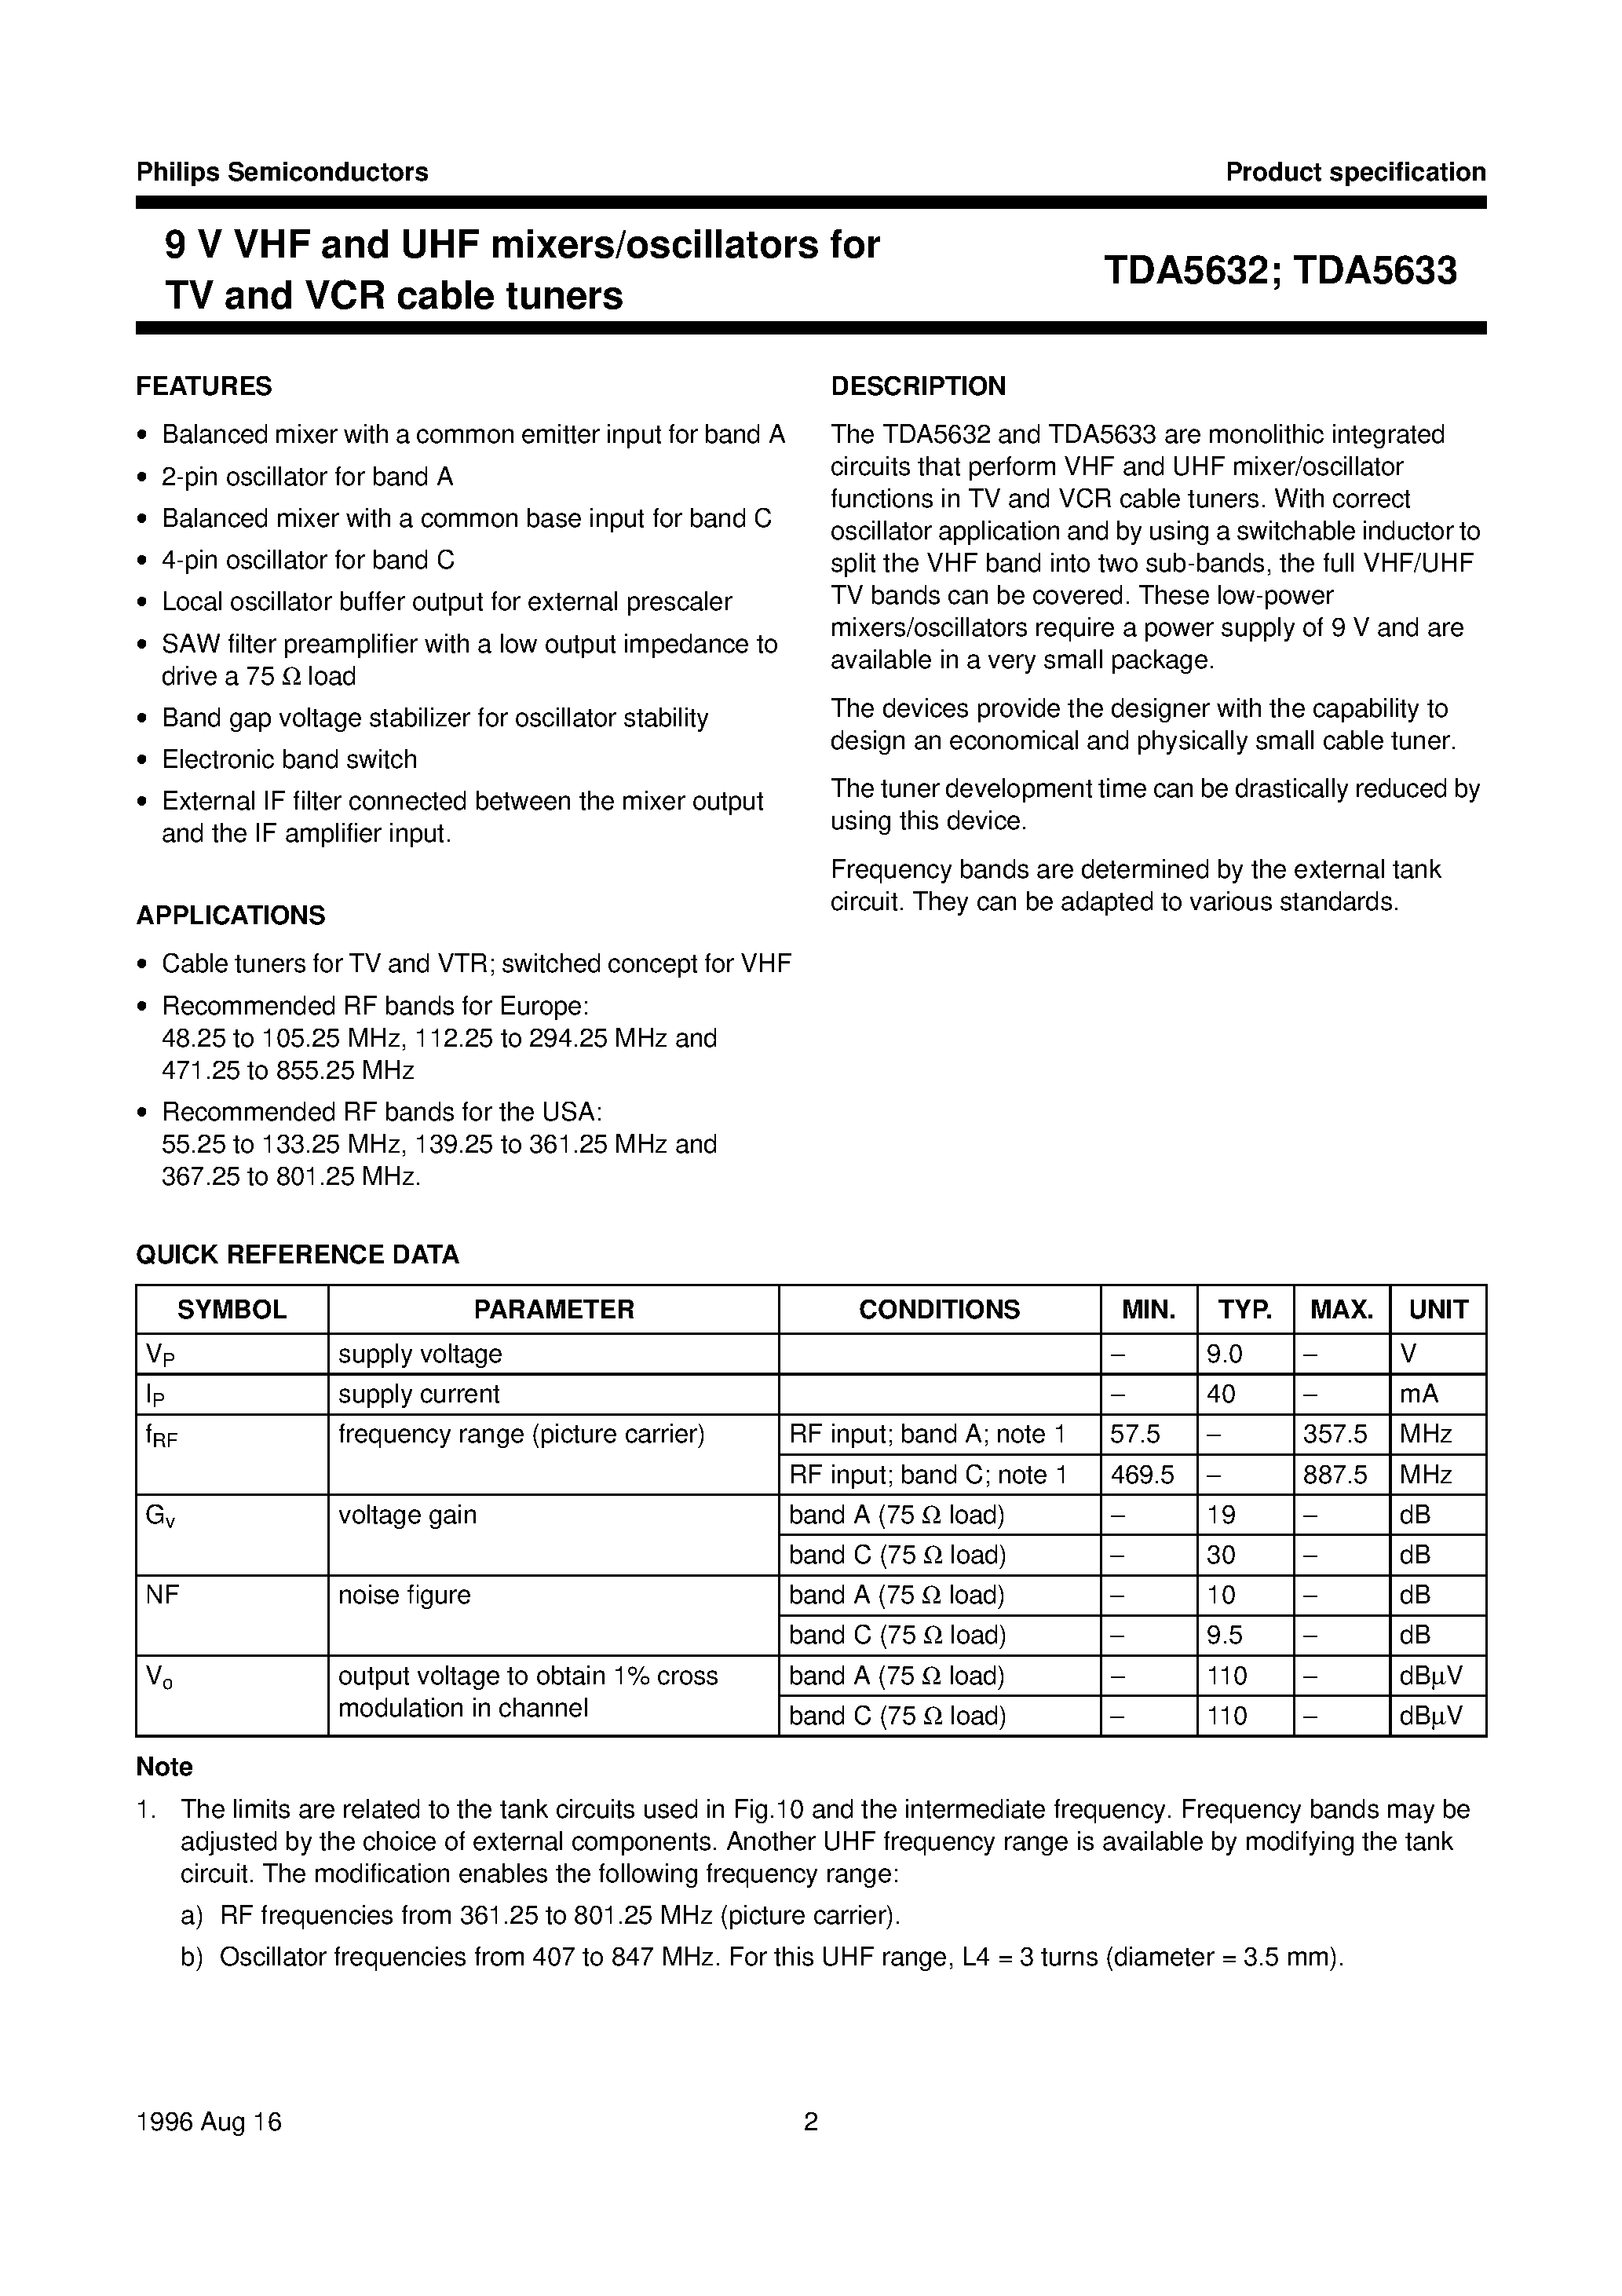 Datasheet TDA5632T - 9 V VHF and UHF mixers/oscillators for TV and VCR cable tuners page 2